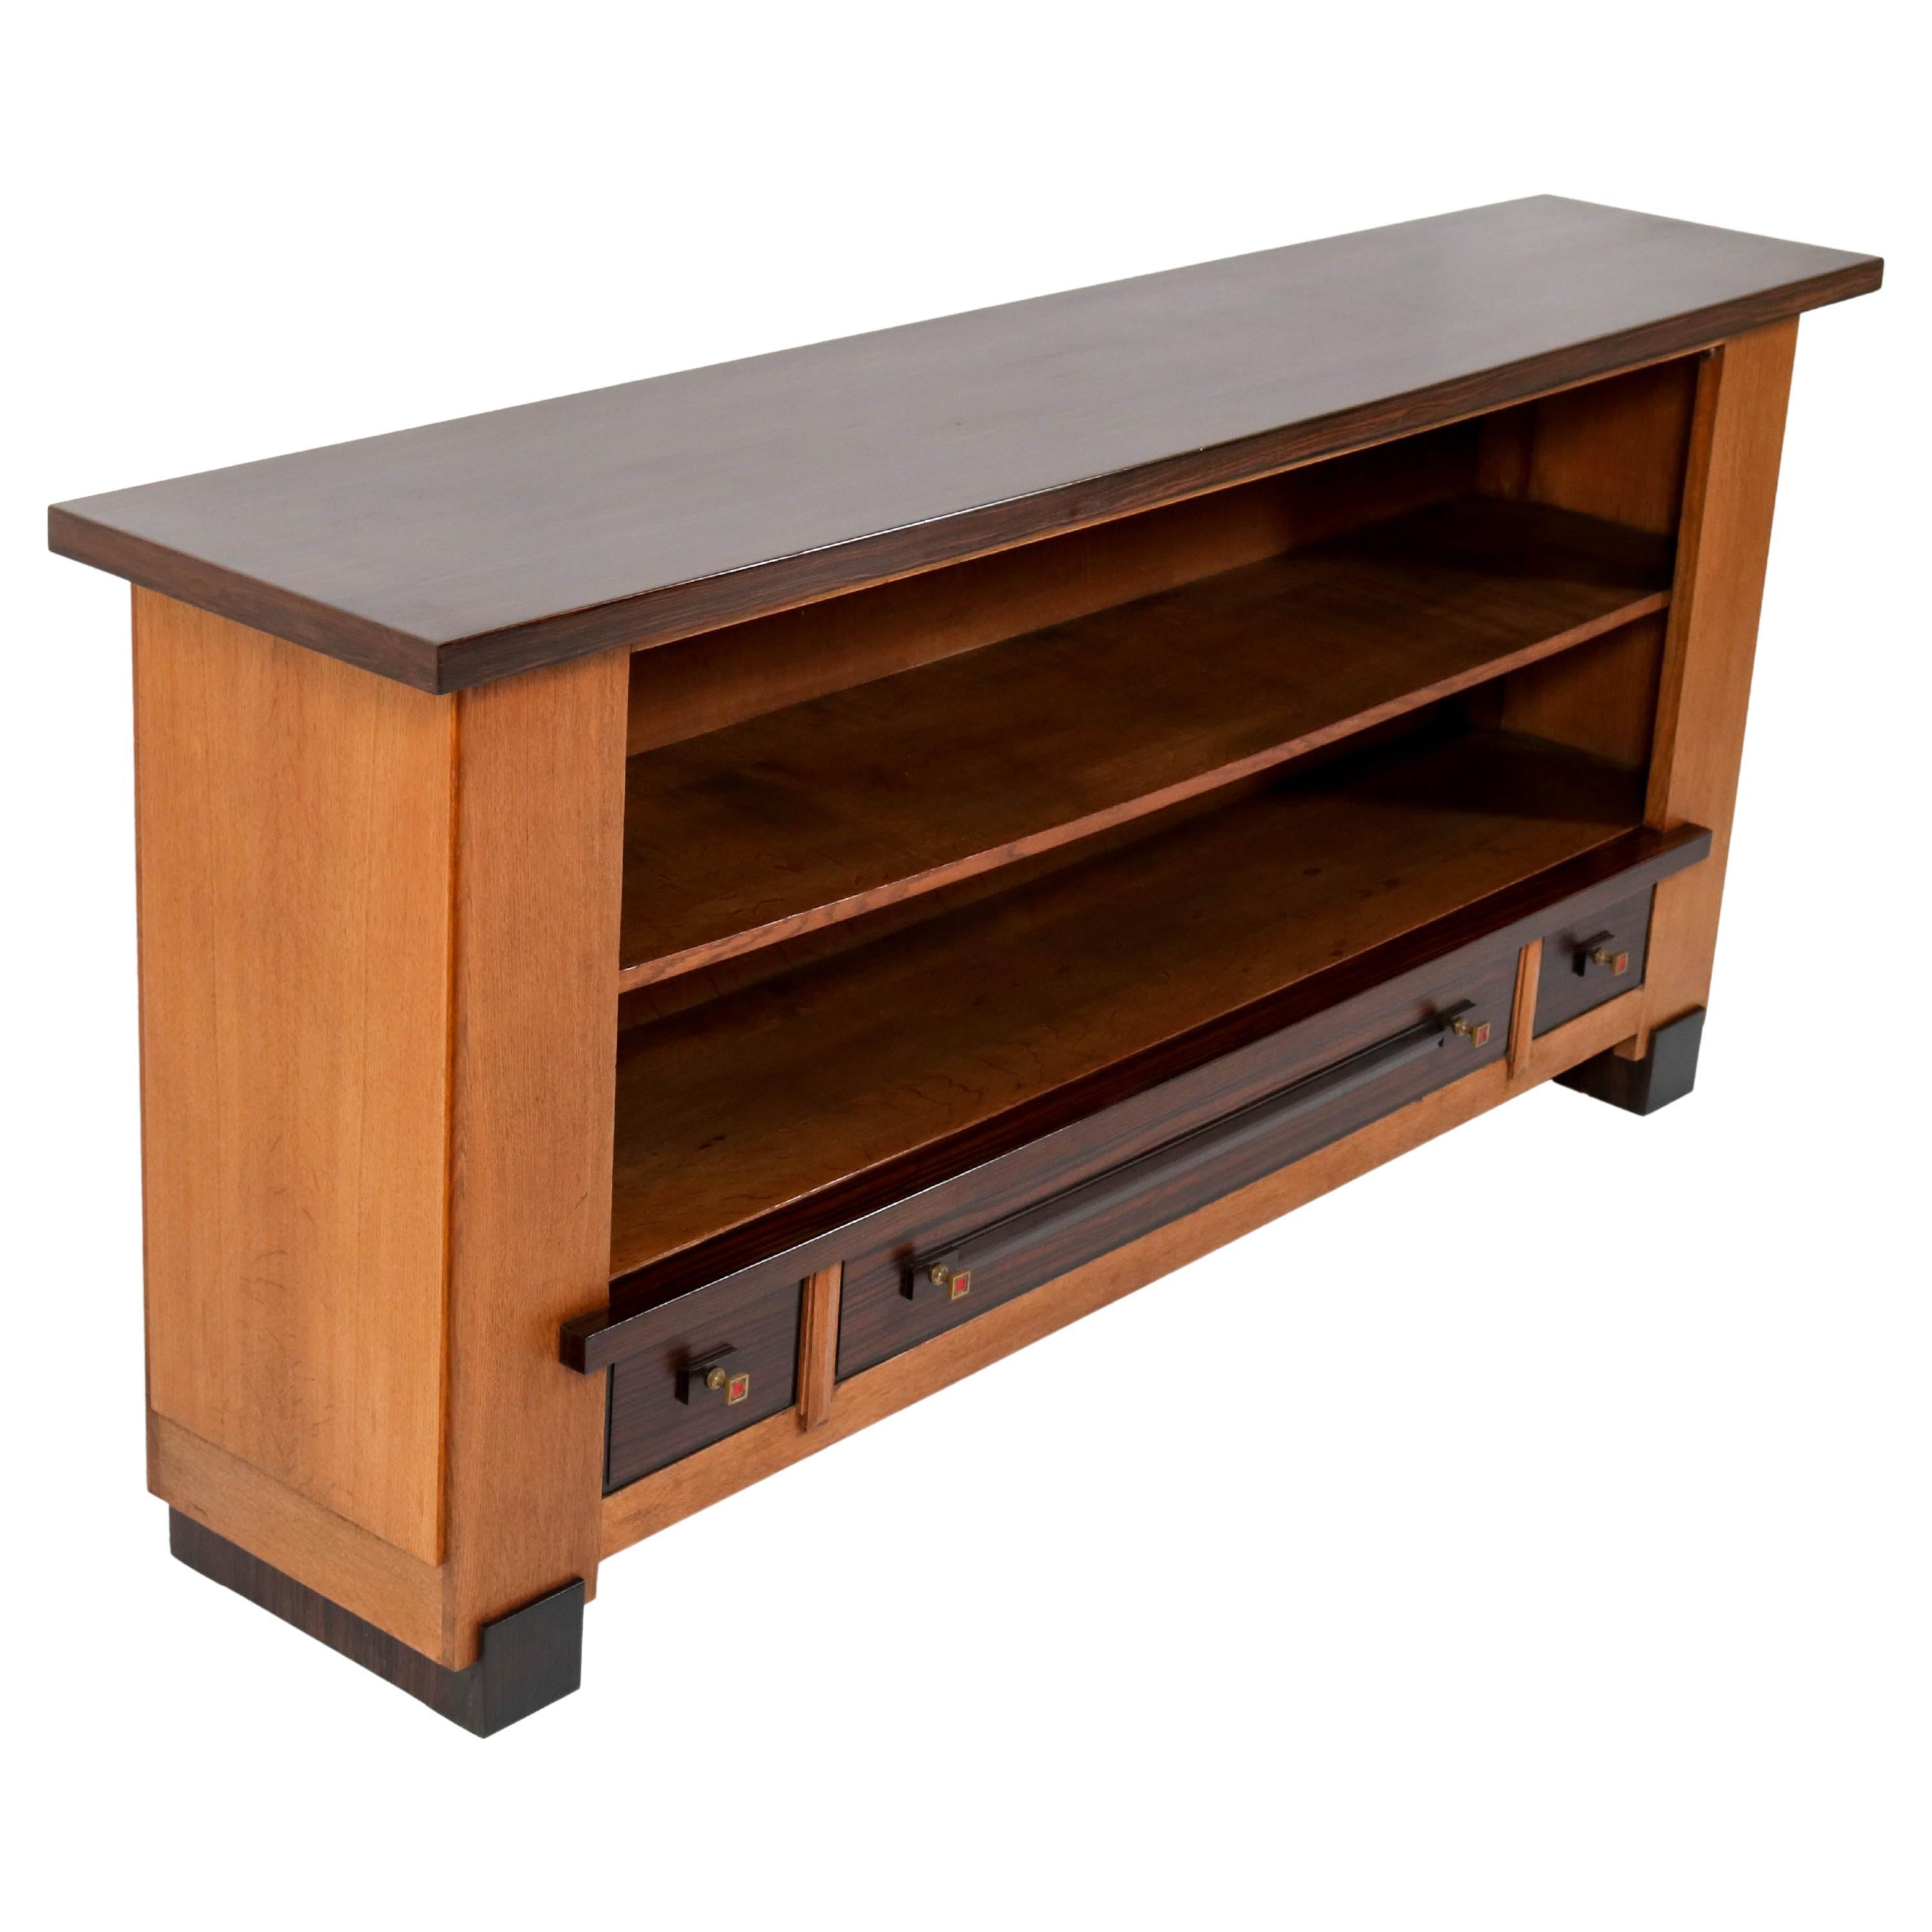 Oak Art Deco Haagse School Credenza or Bookcase by Hendrik Wouda for H. Pander